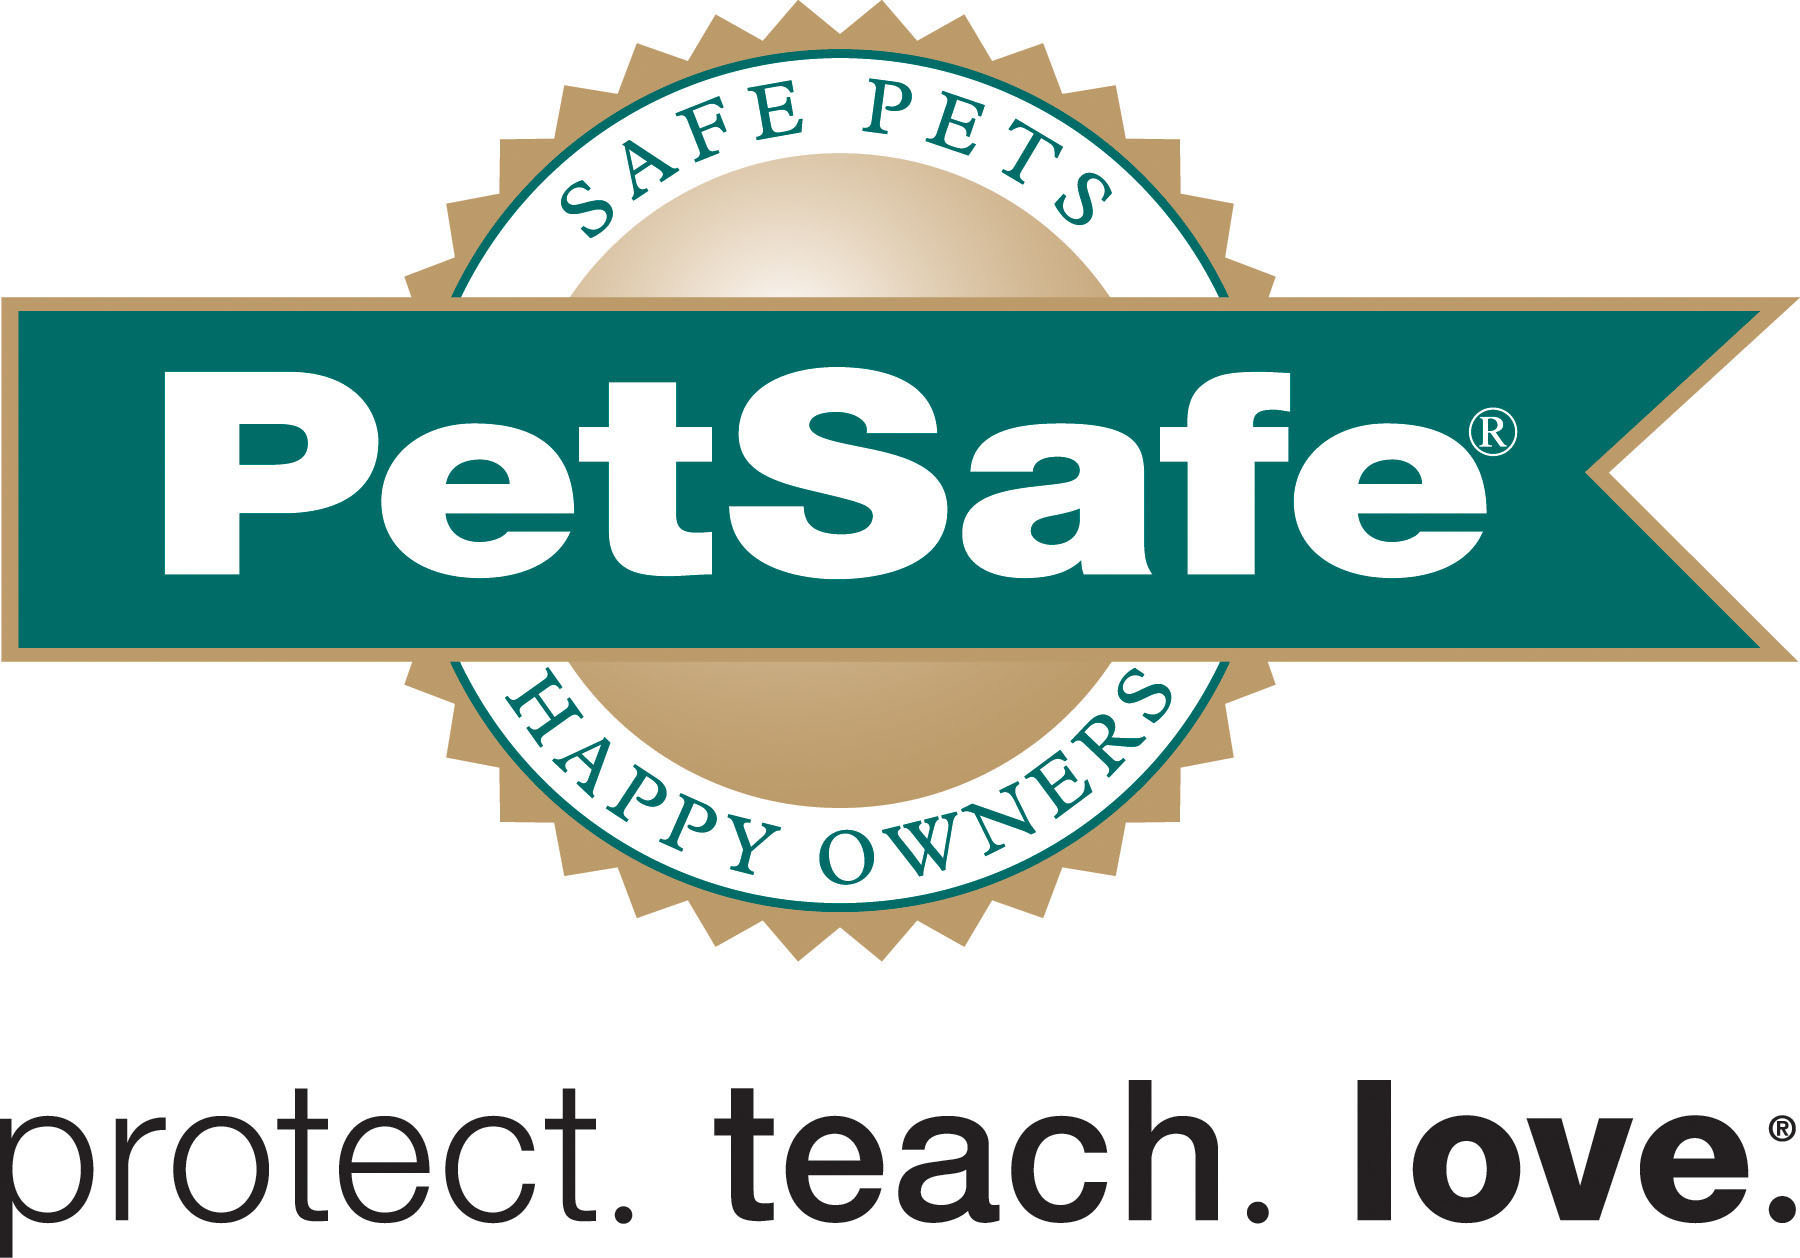 PetSafe® Introduces its First Wi-Fi Enabled Automatic Pet Feeder with